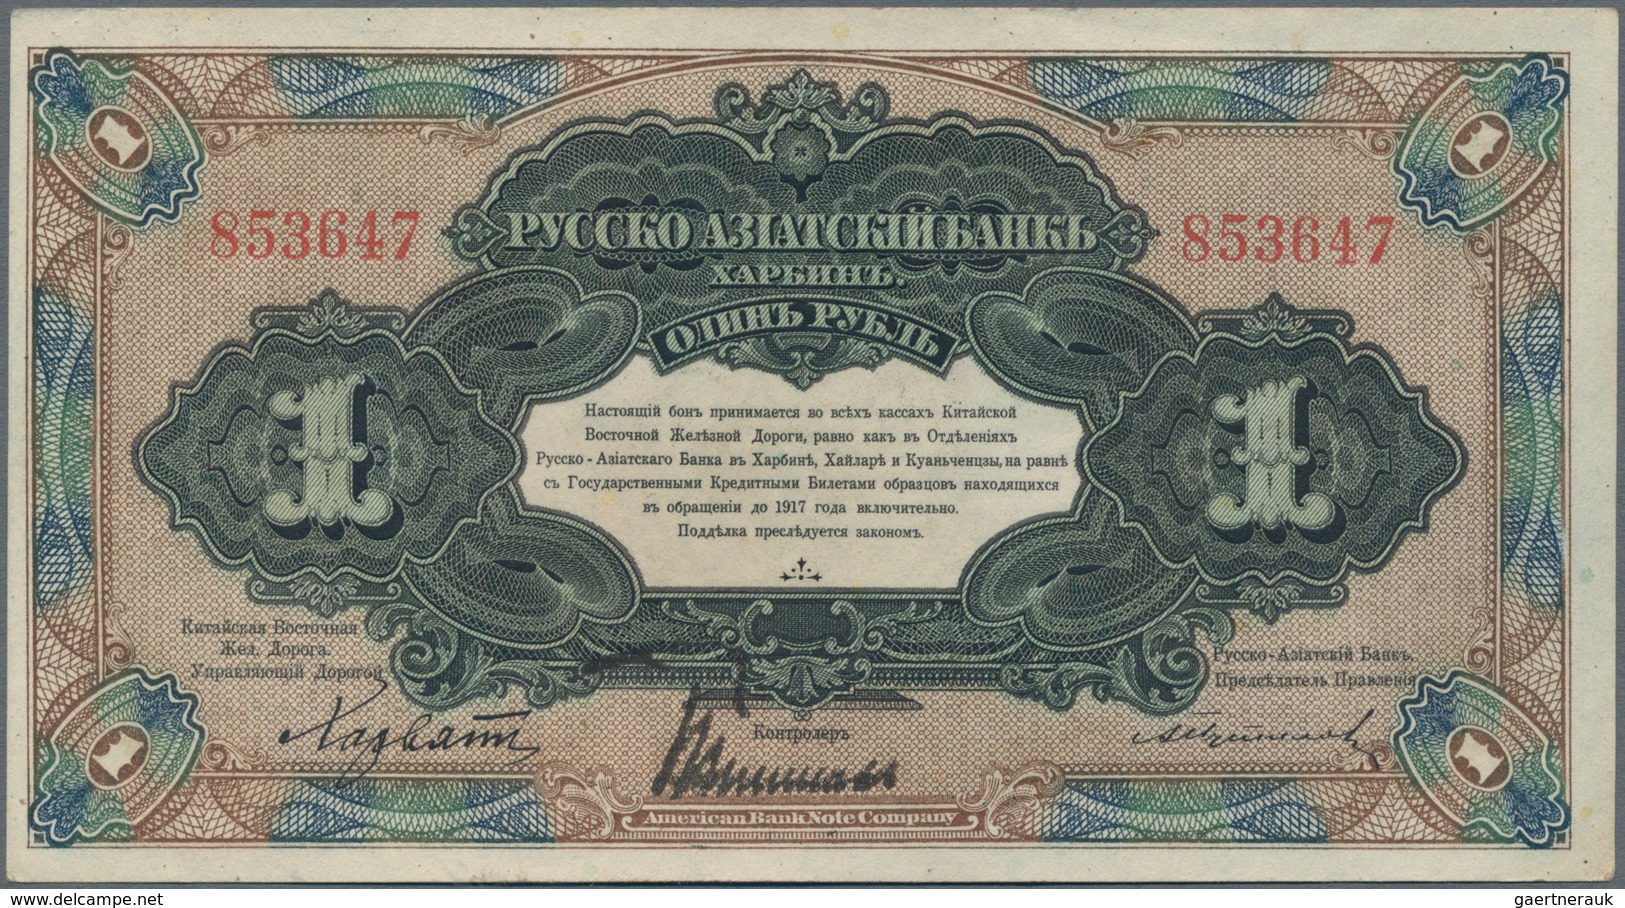 China: Set with 5 banknotes of the 1 Ruble Russo-Asiatic Bank HARBIN branch ND(1917), P.S474, all in